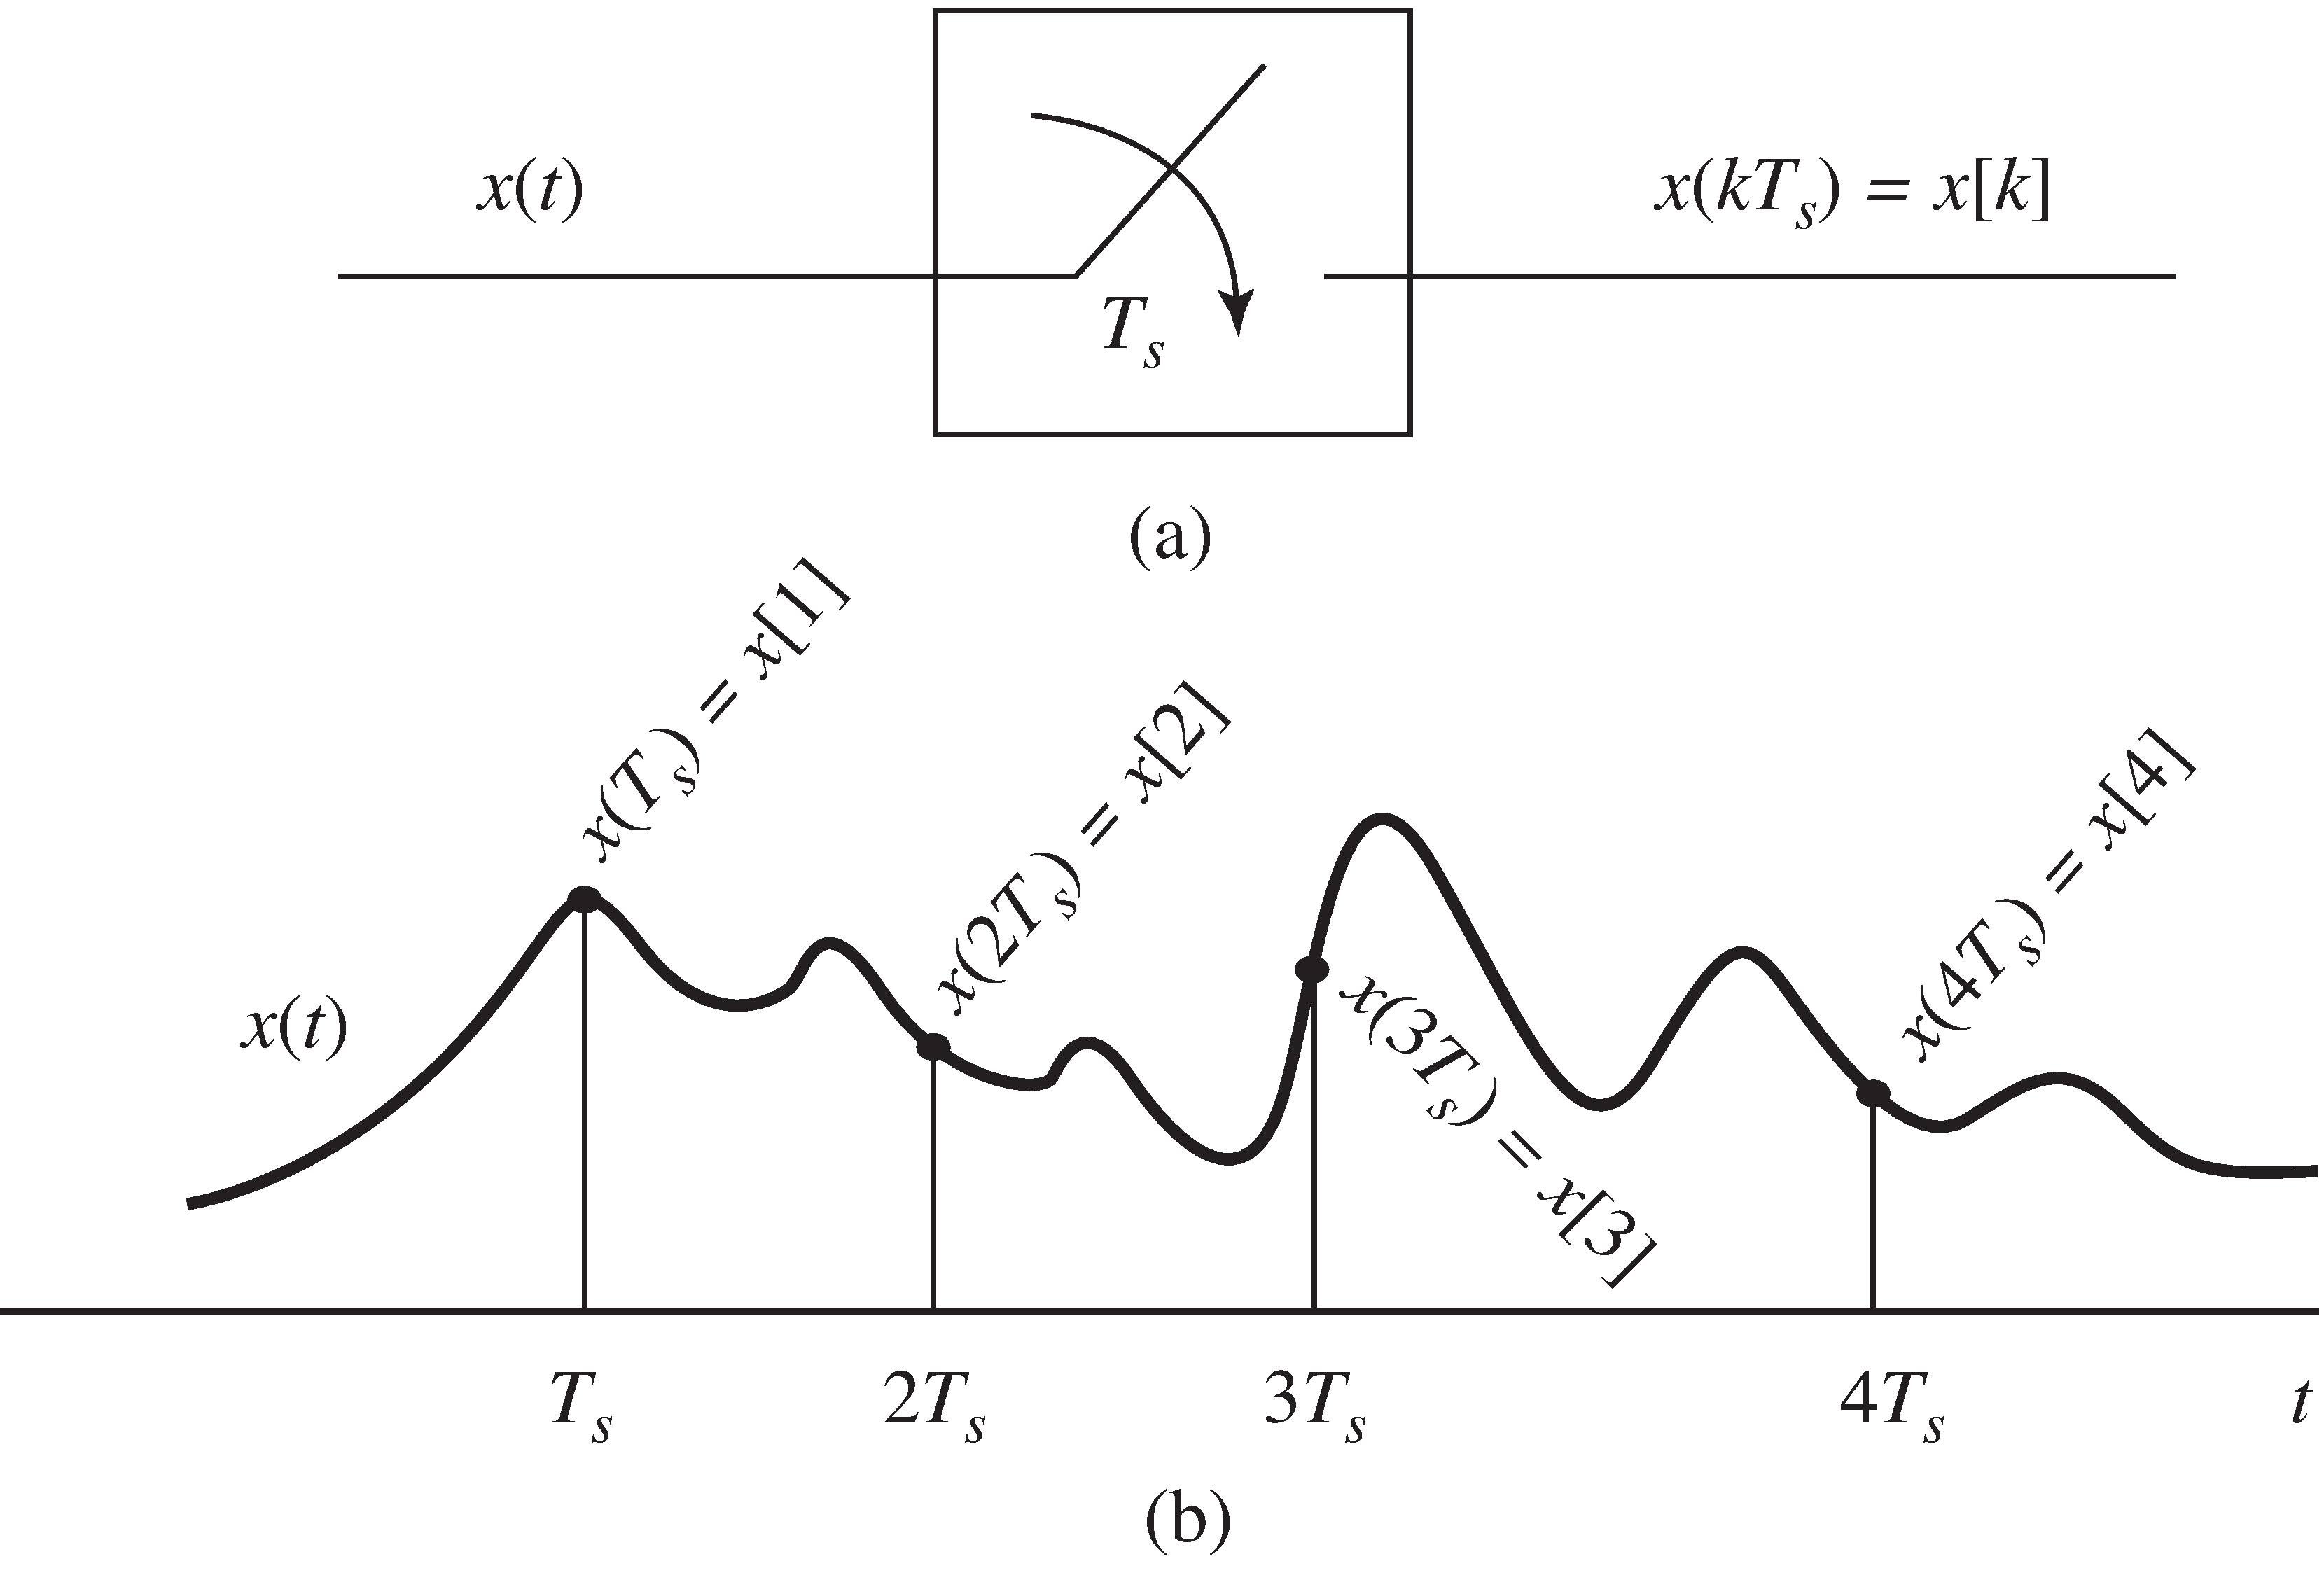 The sampling process is shown in (b) as an evaluation of the signal x(t) at times ...,-2Ts, Ts, 0,Ts, 2Ts,.... This procedure is schematized in (a) as an element that has the continuous-time signal x(t) as input and the discrete-time signal x(kTs) as output.